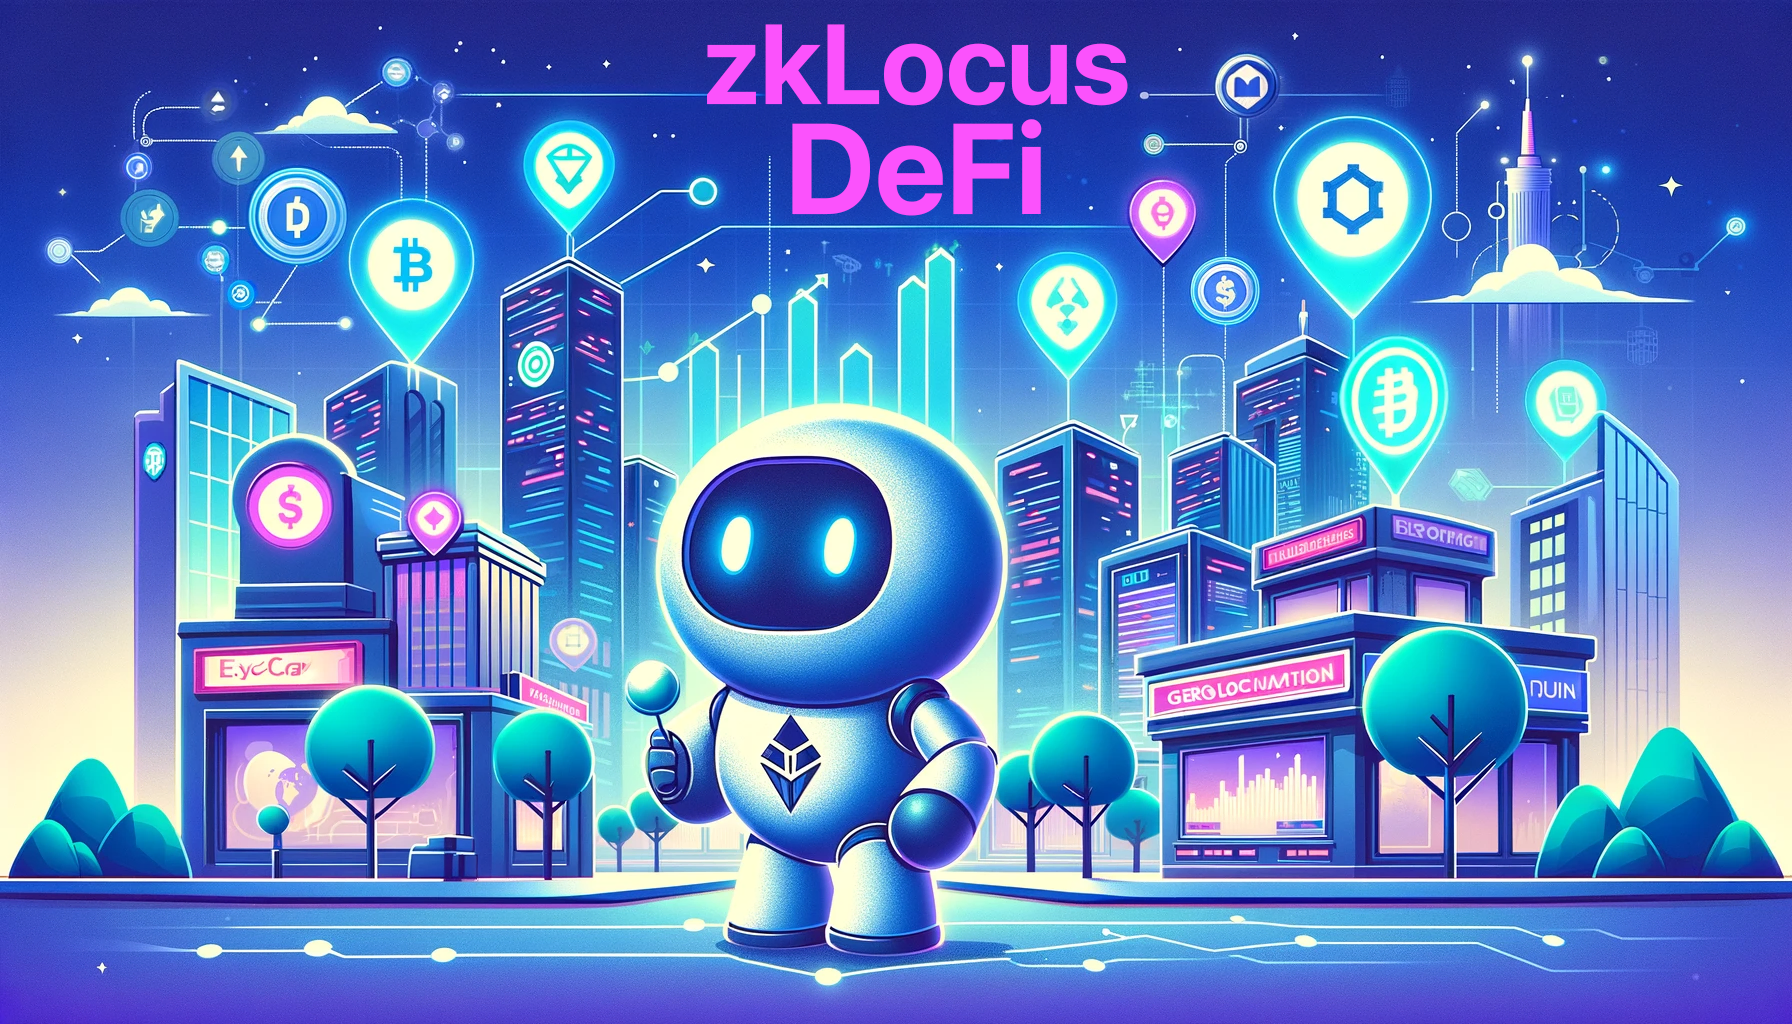 zkLocus in Decentralized Finance (DeFi) applications and use cases